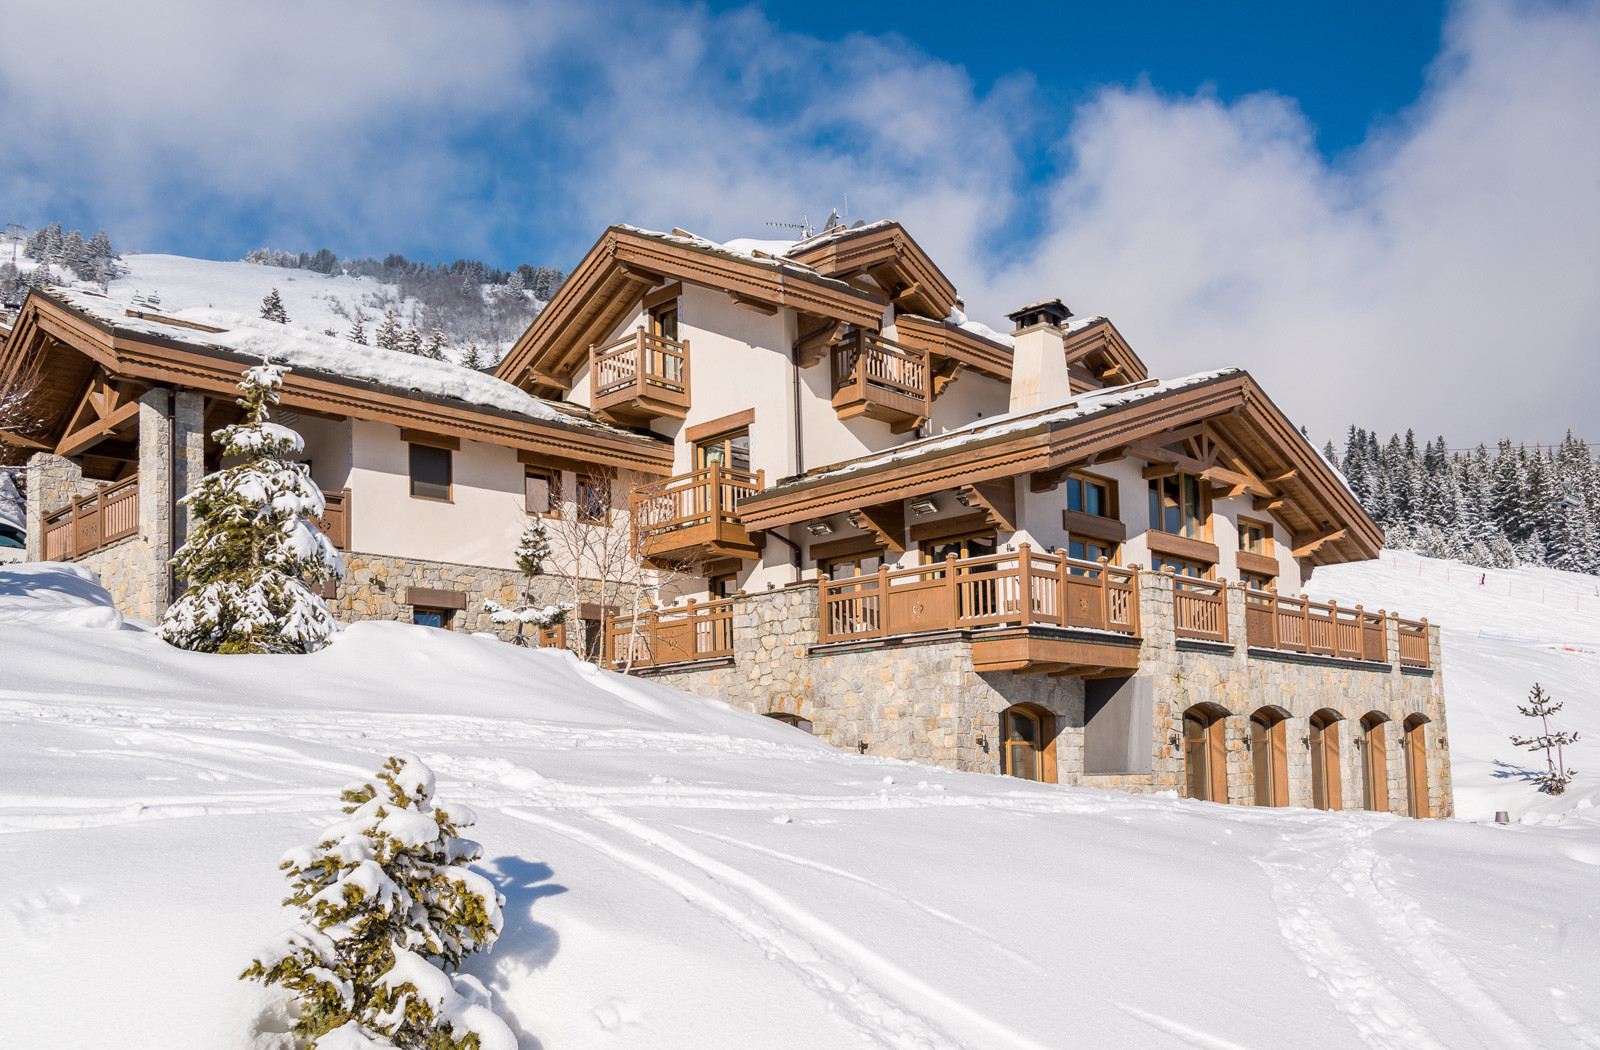 Kings-avenue-courchevel-sauna-jacuzzi-hammam-swimming-pool-childfriendly-parking-gym-boot-heaters-fireplace-ski-in-ski-out-massage-room-terrace-area-courchevel-022